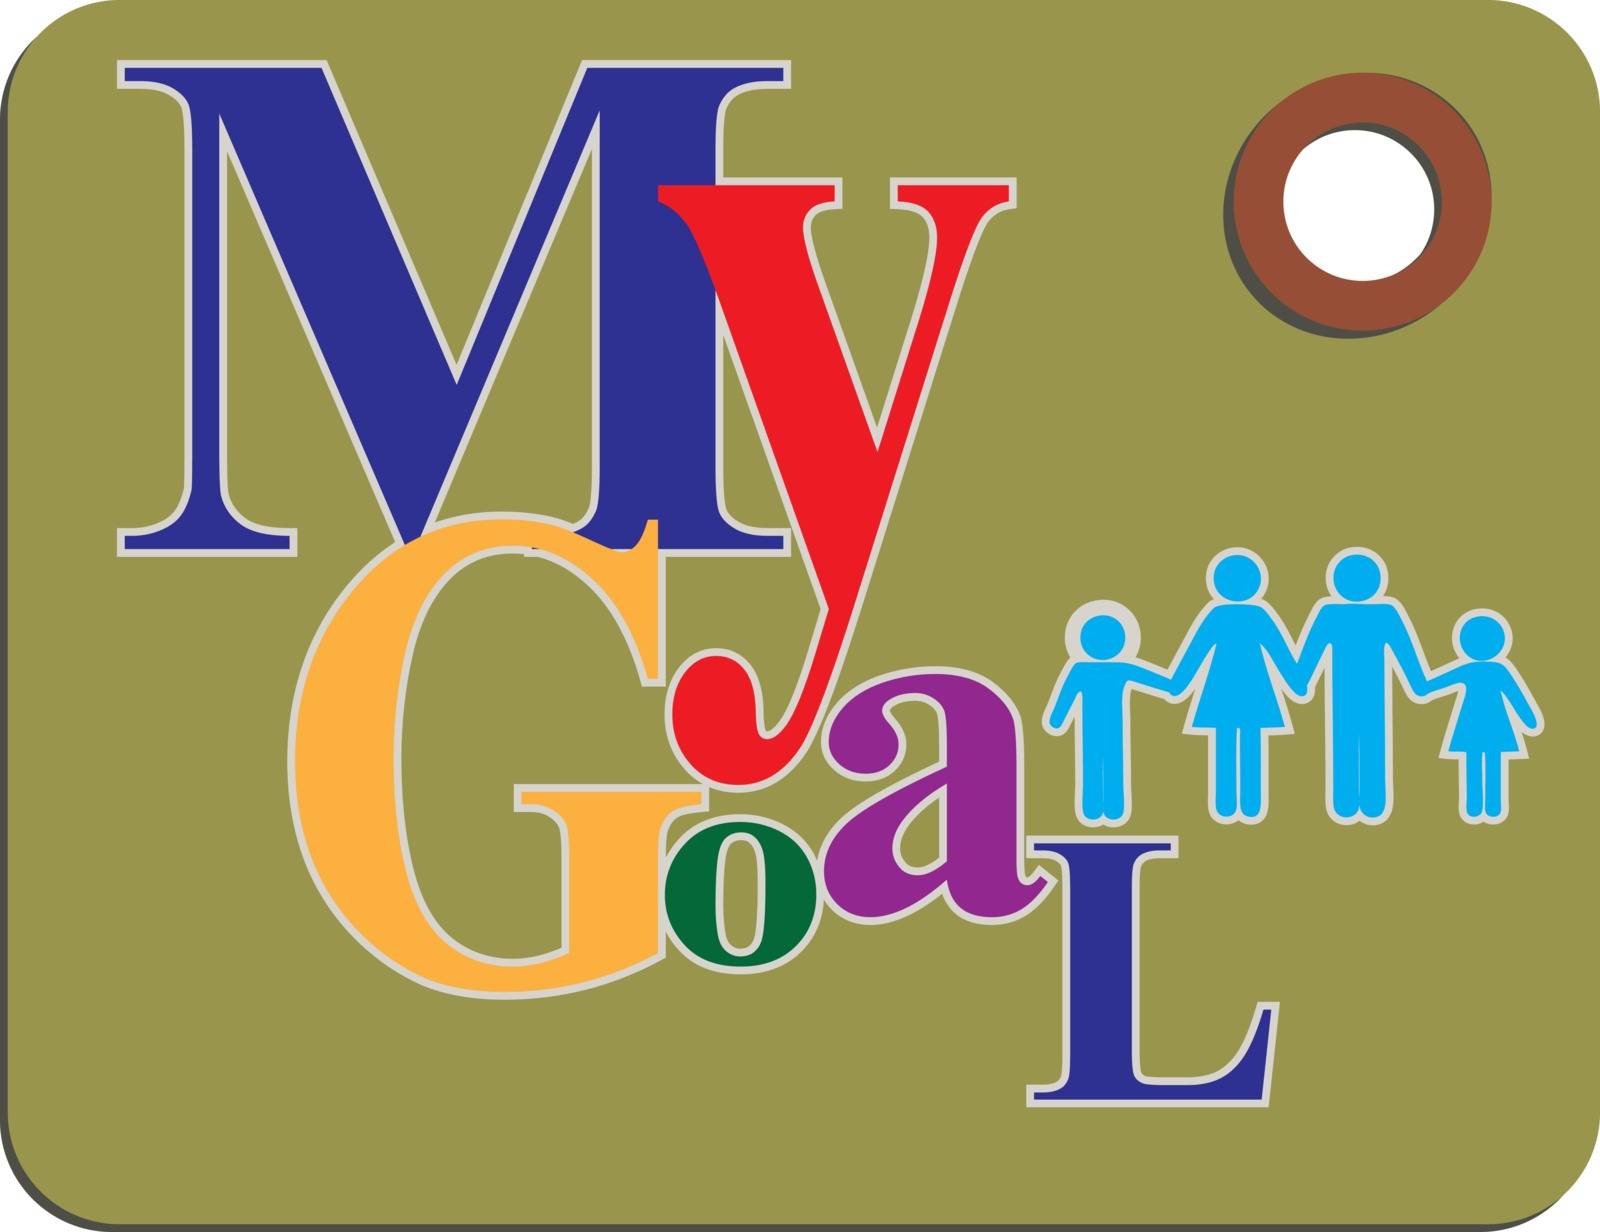 My goal is my family by VIPDesignUSA